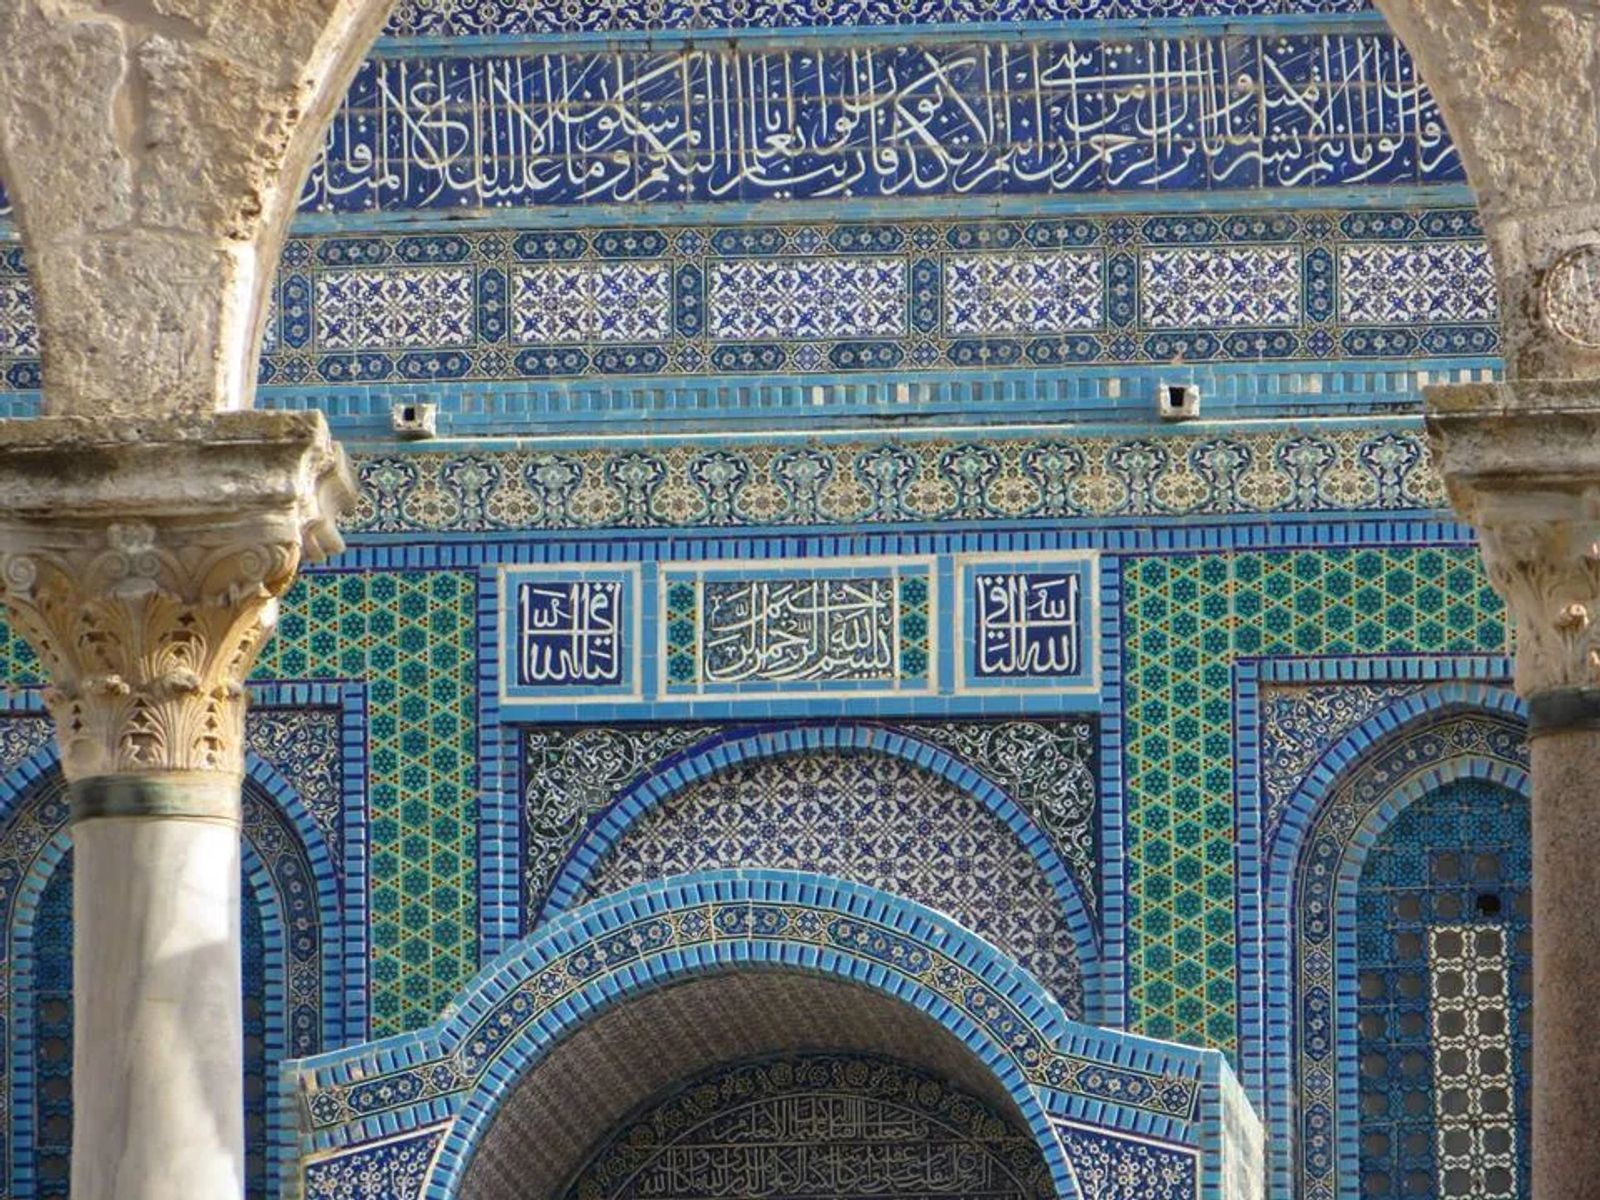 Decoration on the Dome of the Rock